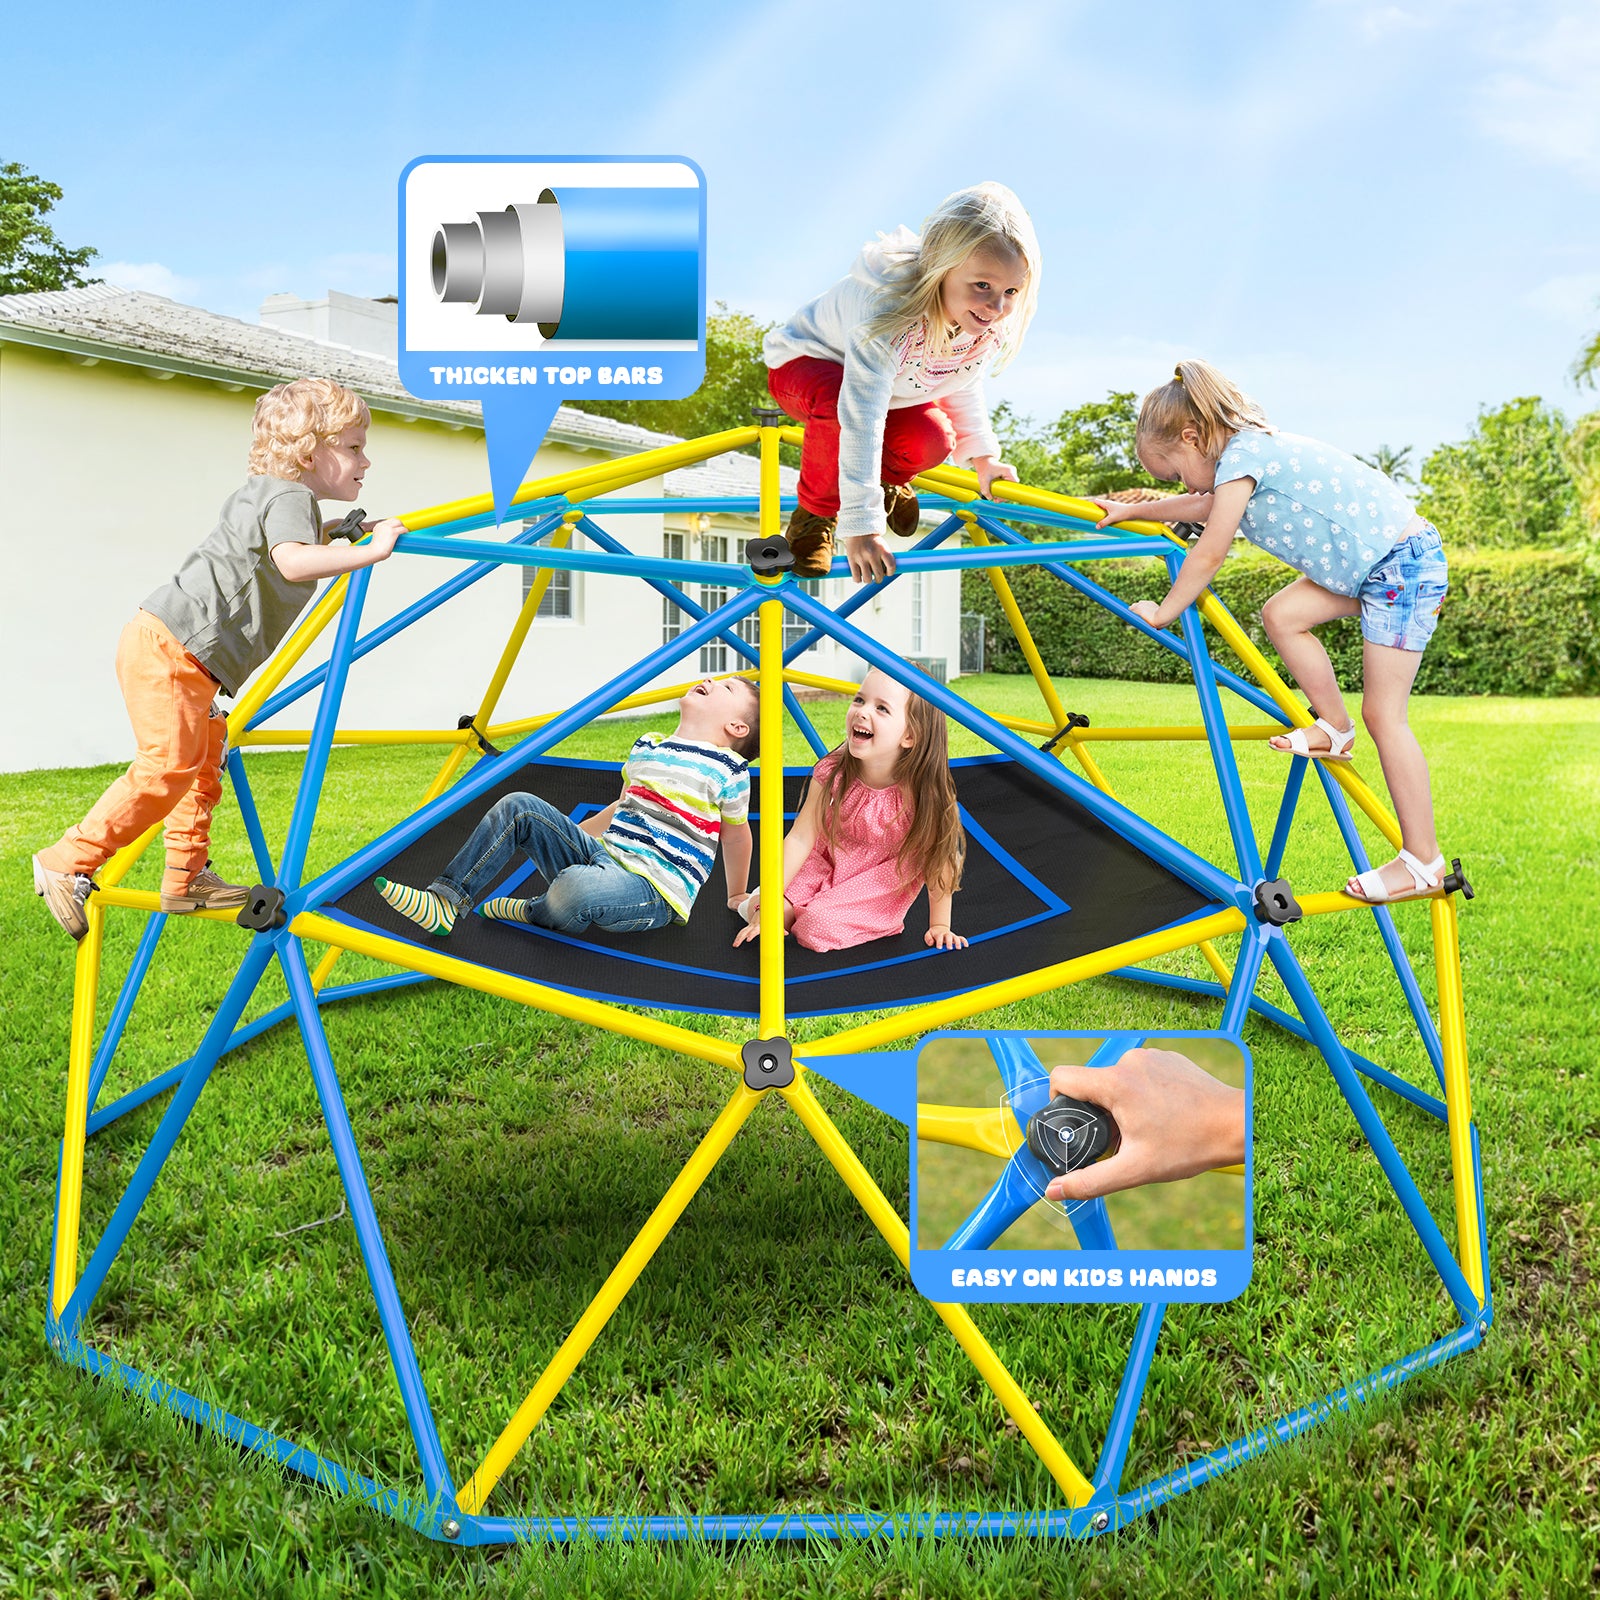 10ft Climbing Dome with Canopy, Jungle Gym for Kids